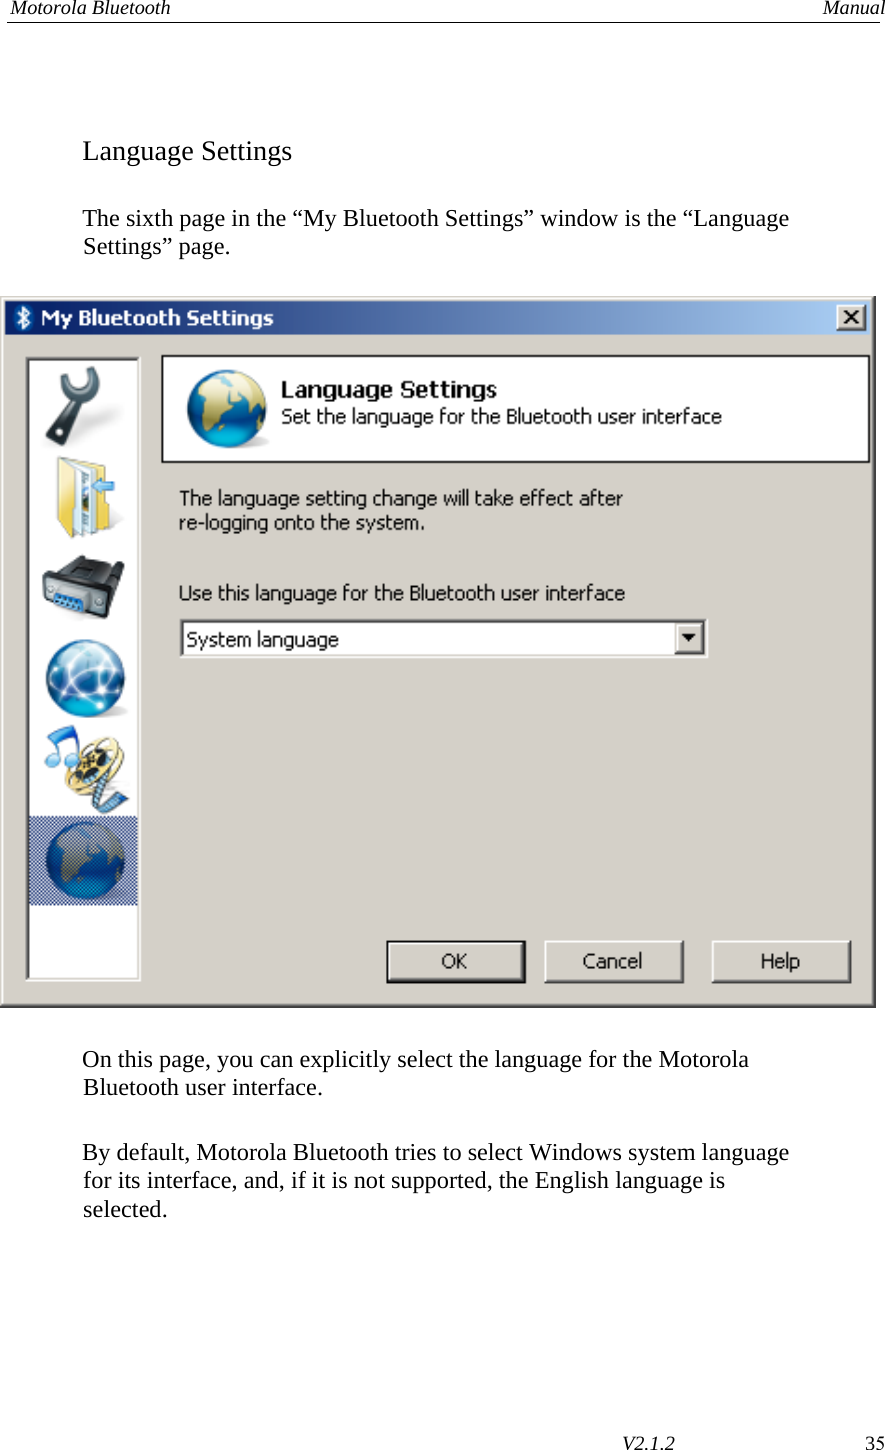 Motorola Bluetooth    Manual        V2.1.2  35  Language Settings  The sixth page in the “My Bluetooth Settings” window is the “Language Settings” page.    On this page, you can explicitly select the language for the Motorola Bluetooth user interface.  By default, Motorola Bluetooth tries to select Windows system language for its interface, and, if it is not supported, the English language is selected. 